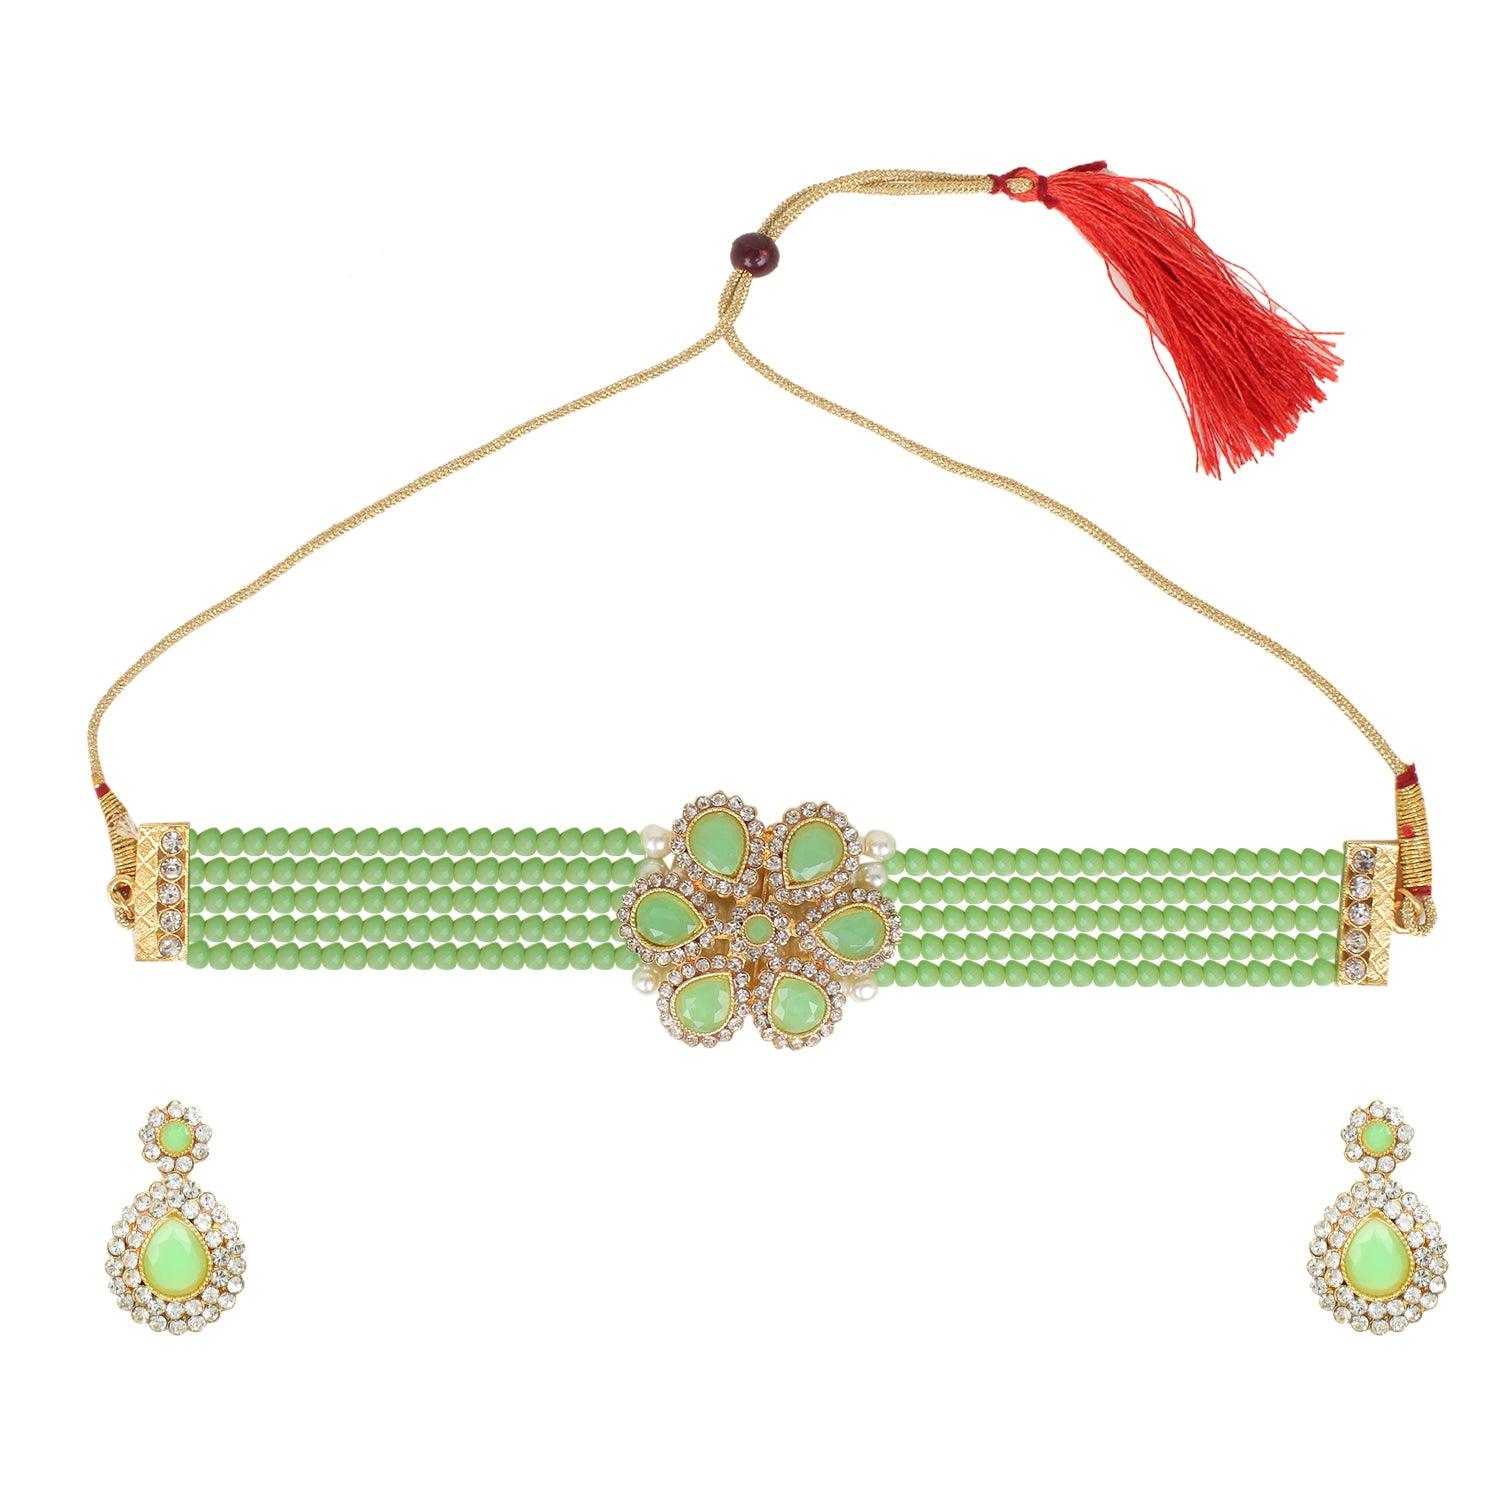 Kundan and Green Beads Choker Necklace Set for Women and Girls